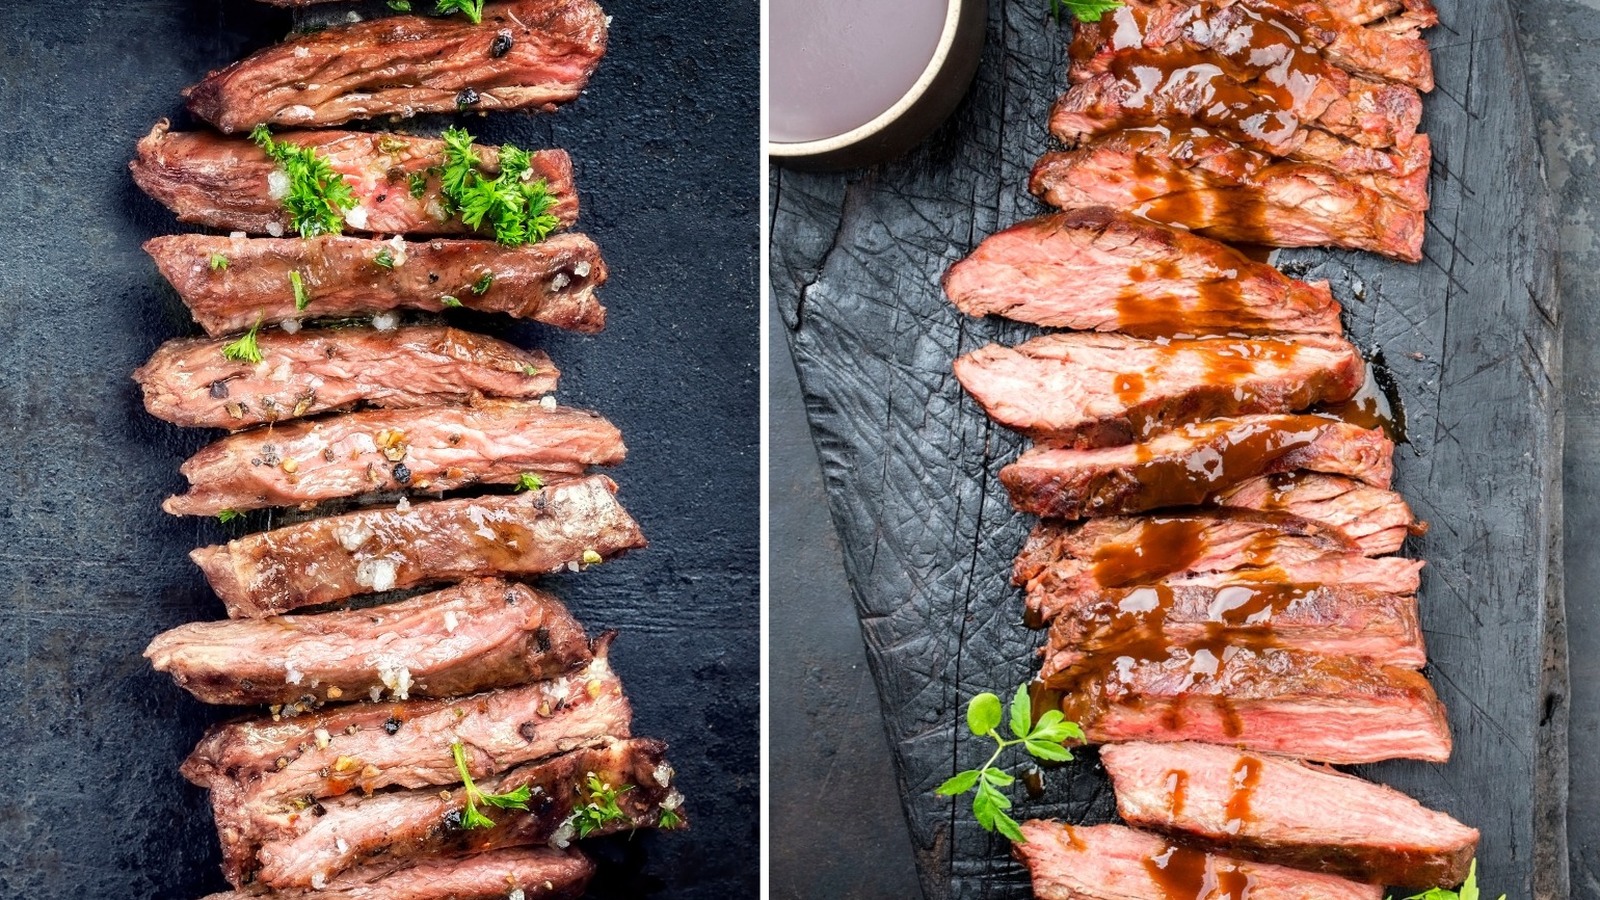 Skirt Steak or Flank Steak: What's the Difference?